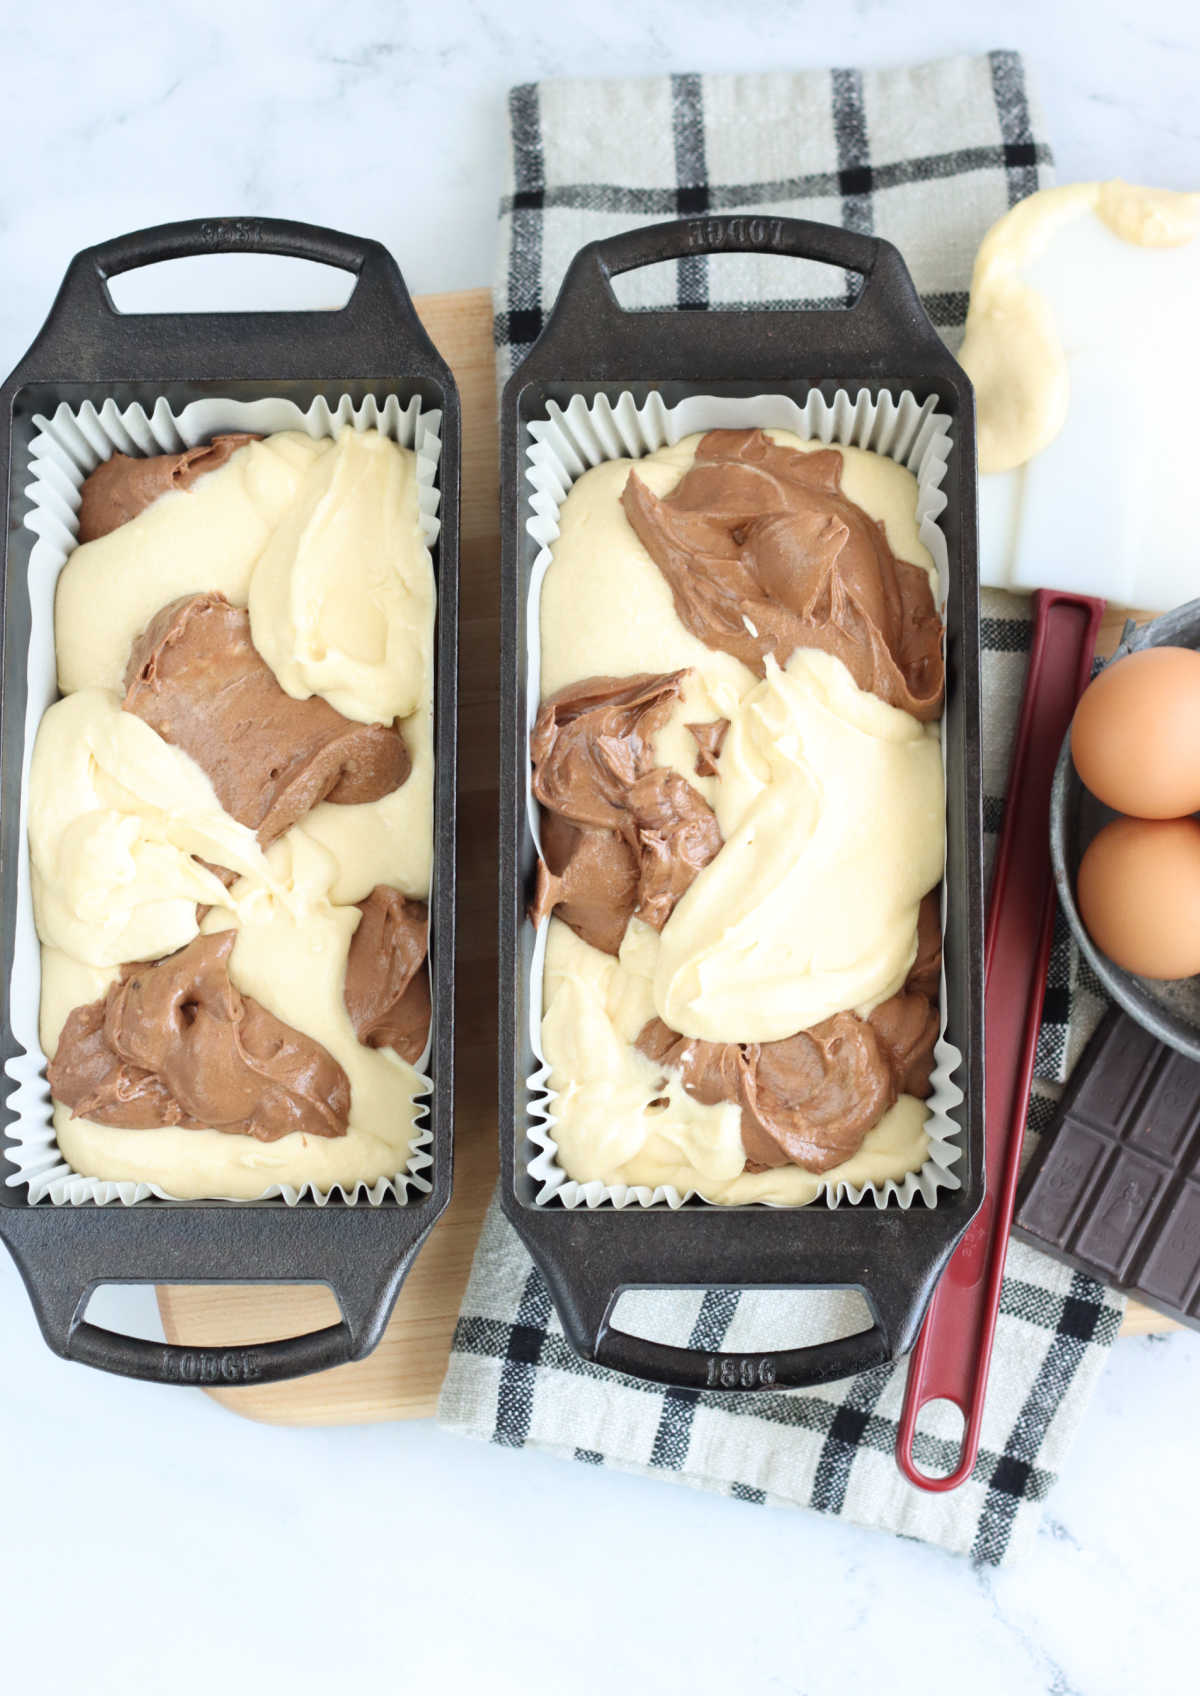 Two cast iron loaf pans with chocolate and vanilla cake batter scoops on wooden cutting board.